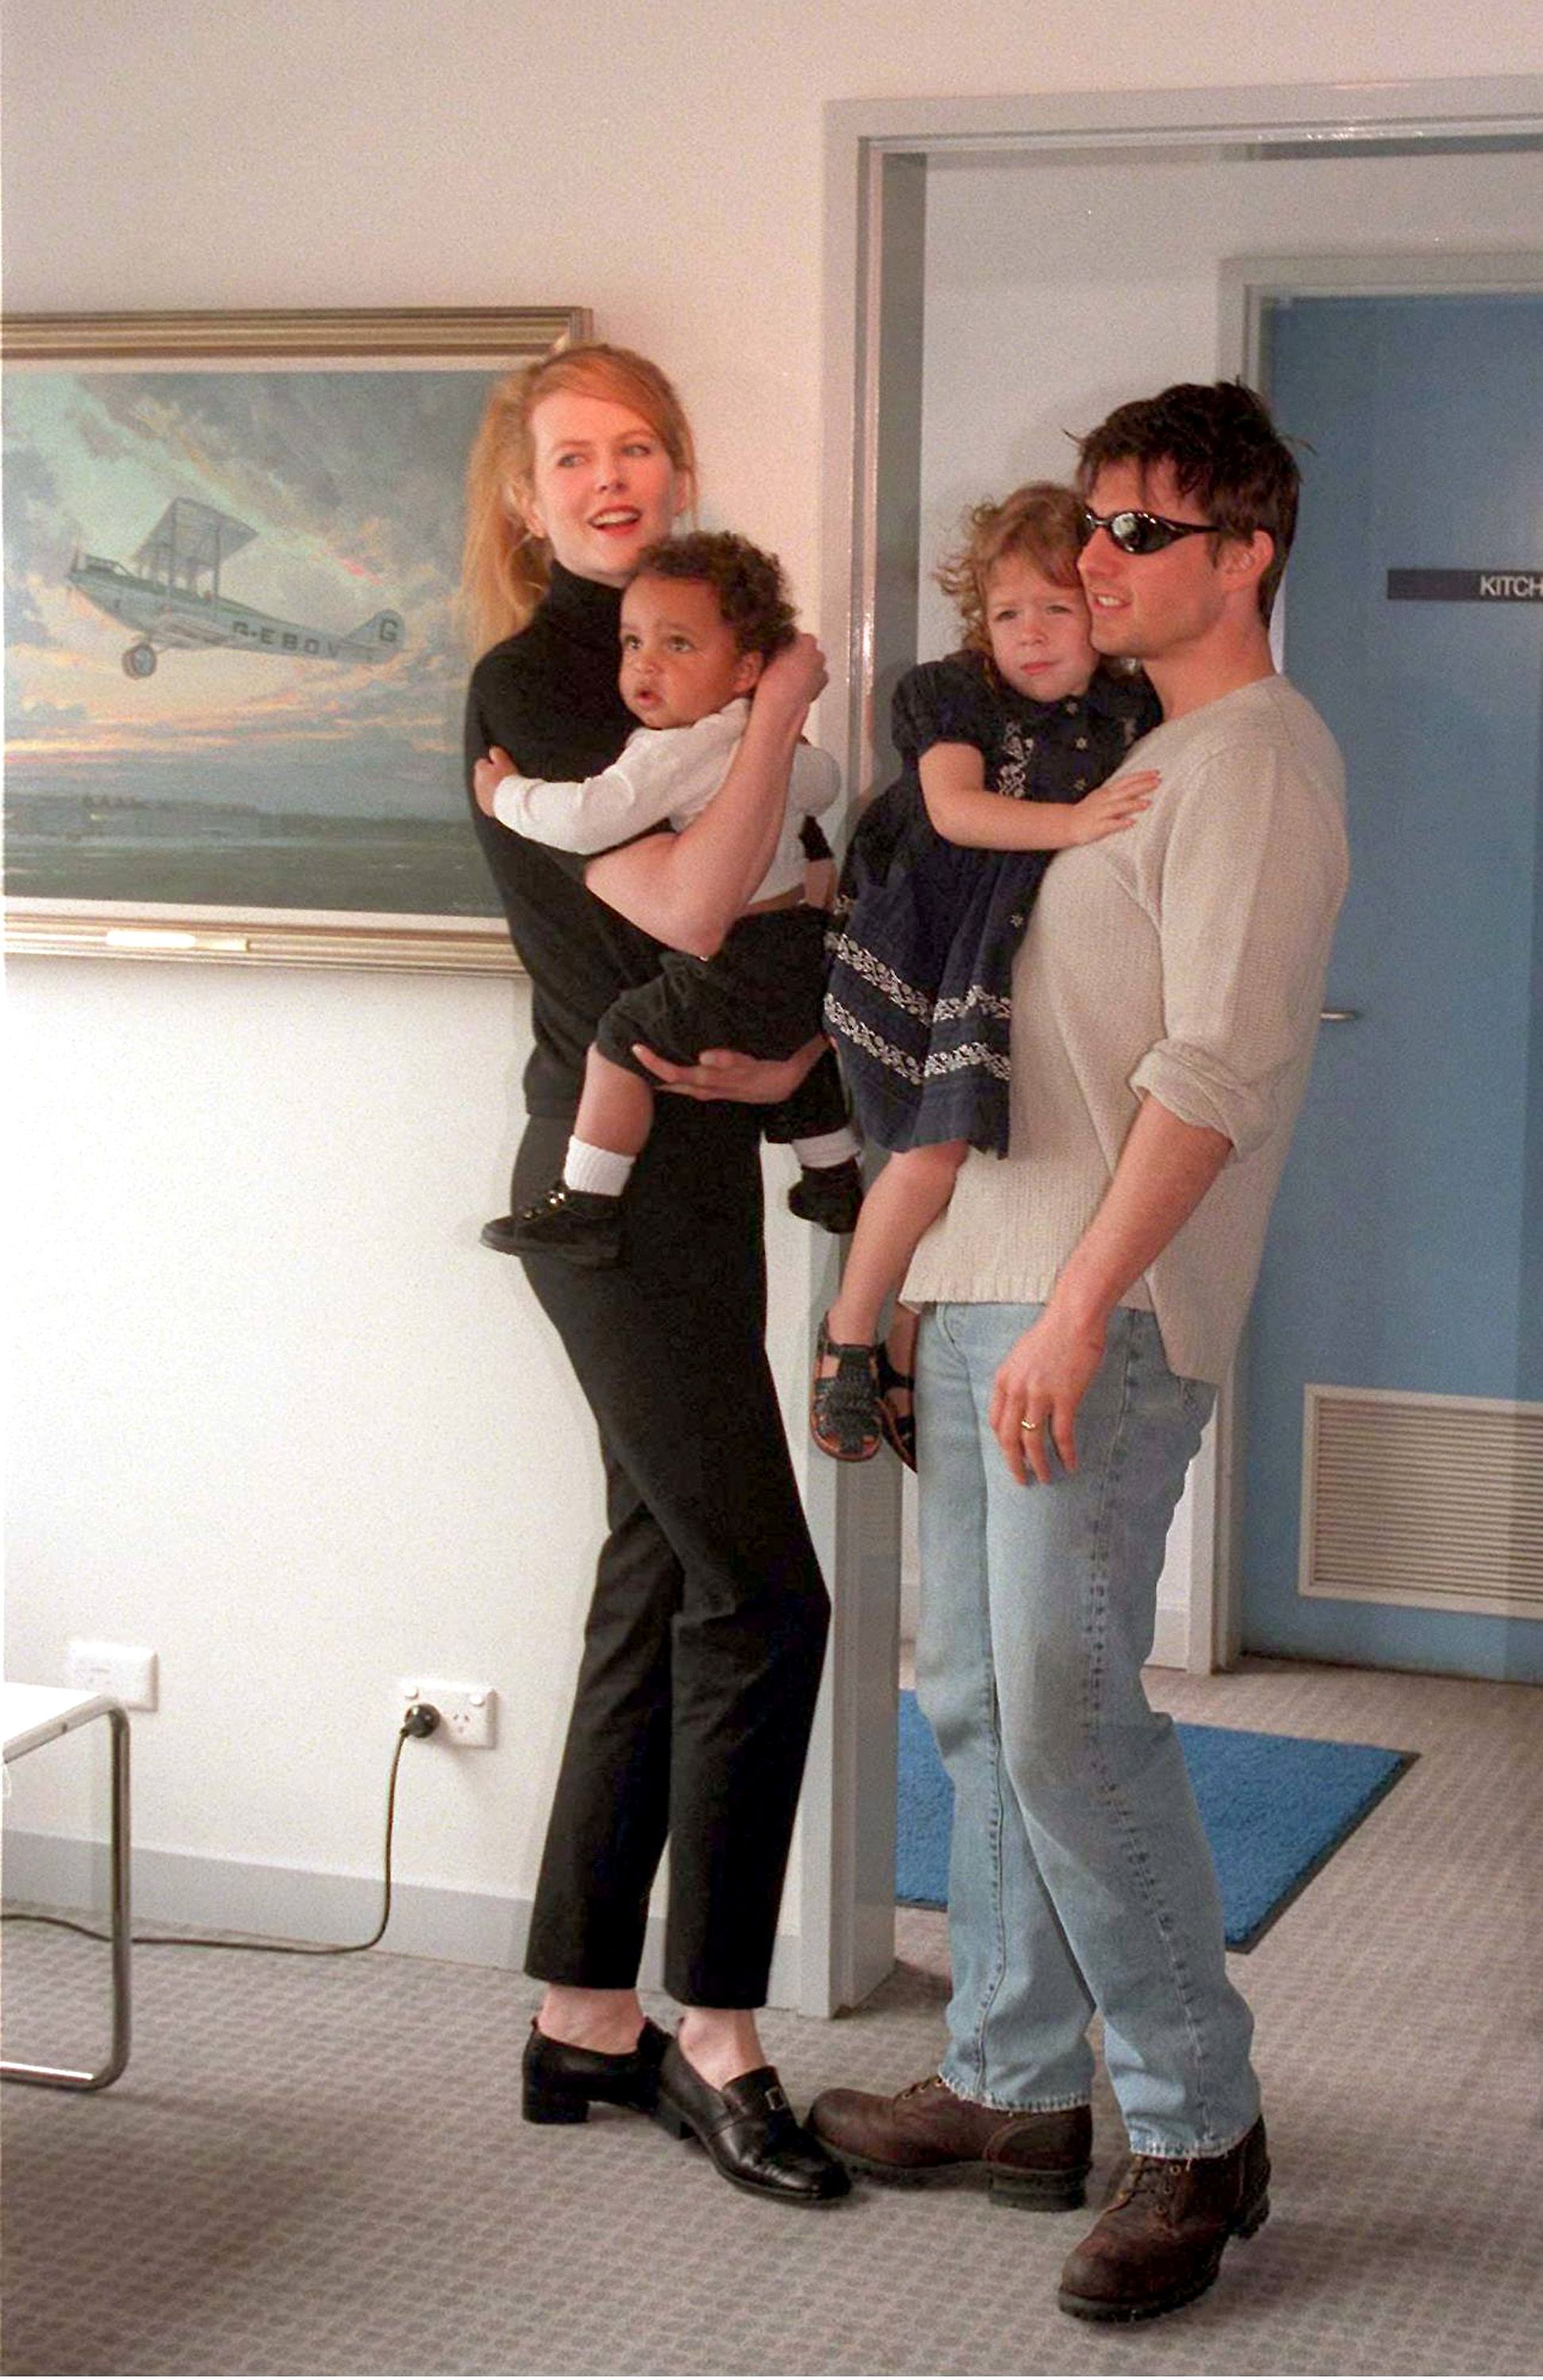 Nicole Kidman and Tom Cruise at Sydney Kingsford Smith airport with their children Connor and Isabella on January 24, 1996, in Sydney, Australia. | Source: Patrick Riviere/Getty Images